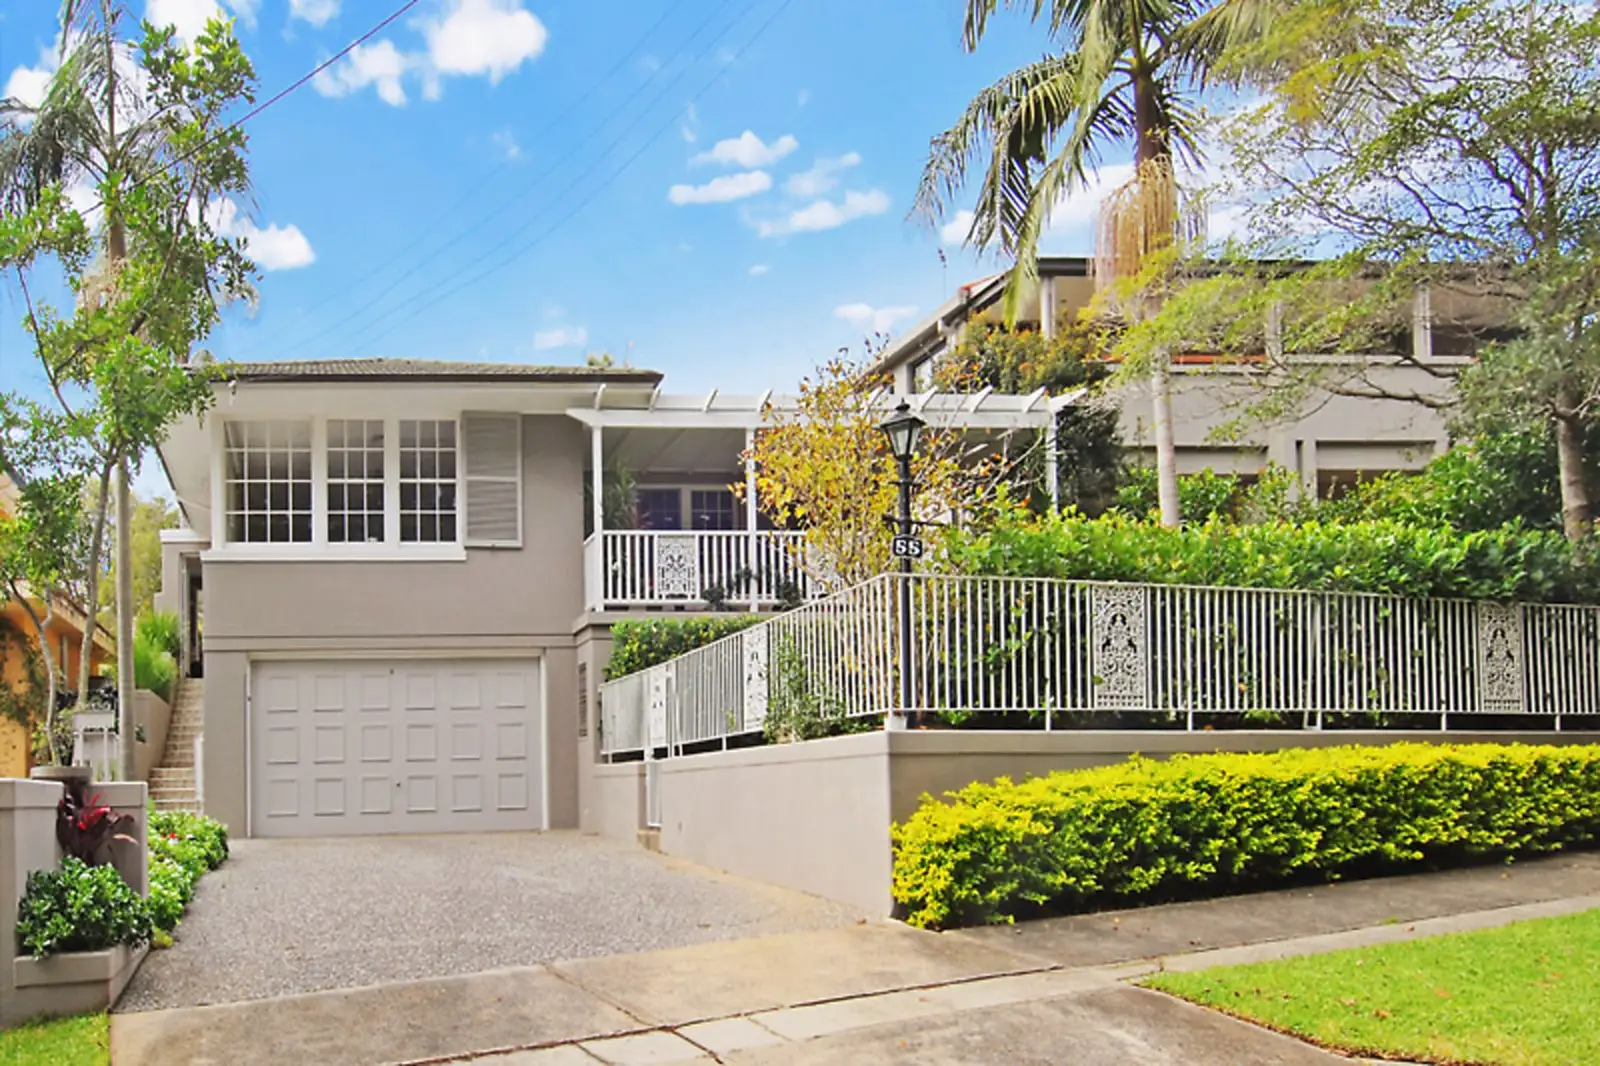 55 Olola Avenue, Vaucluse Leased by Sydney Sotheby's International Realty - image 1